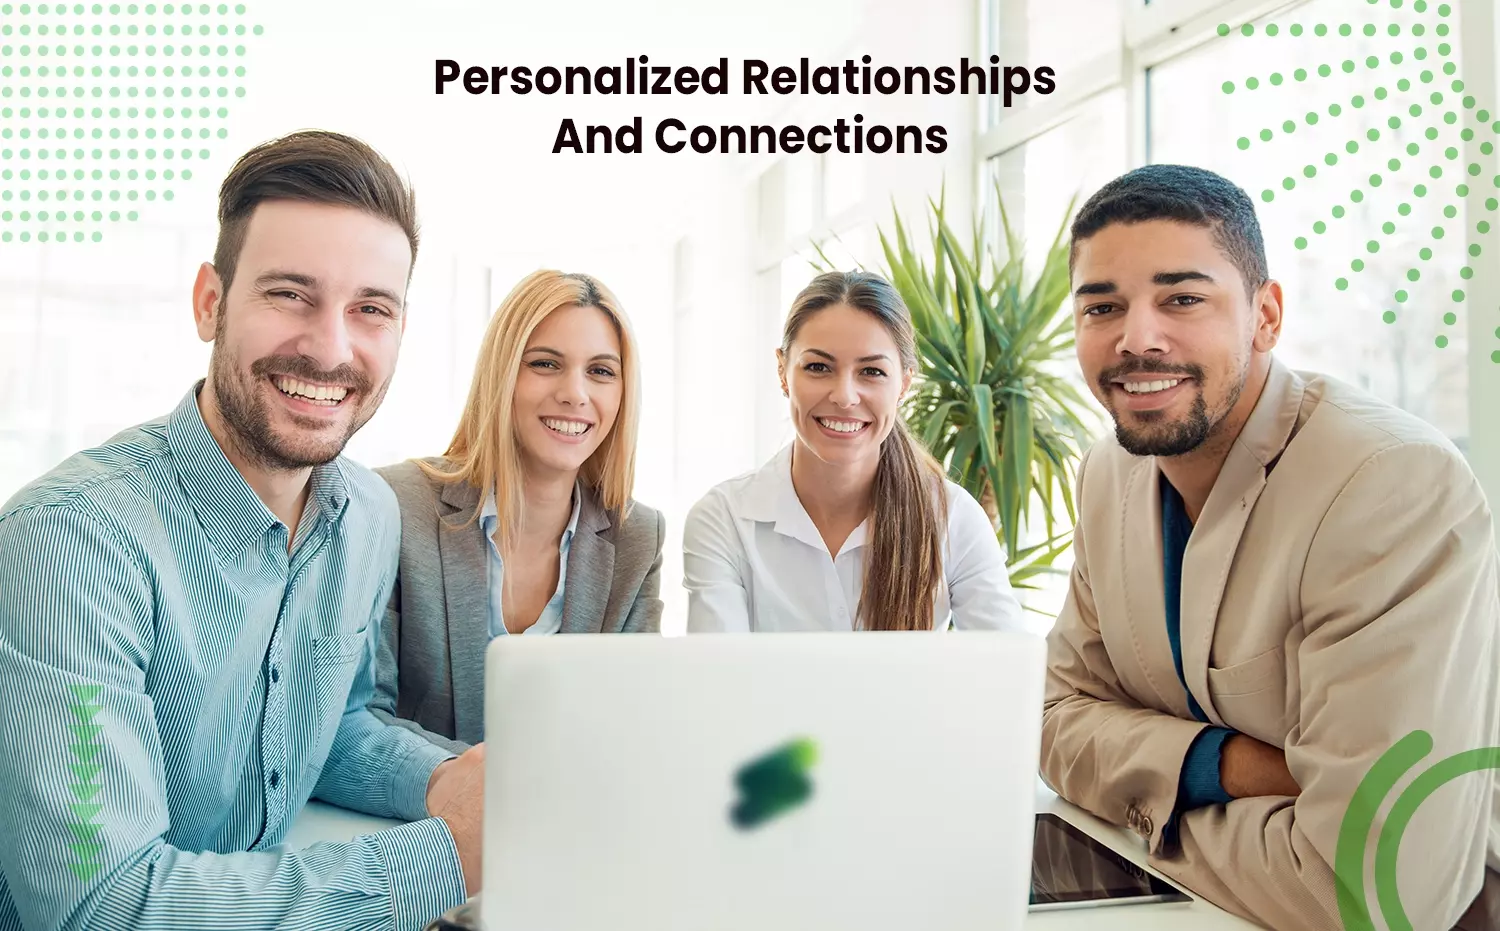 Personalized Relationships And Connections